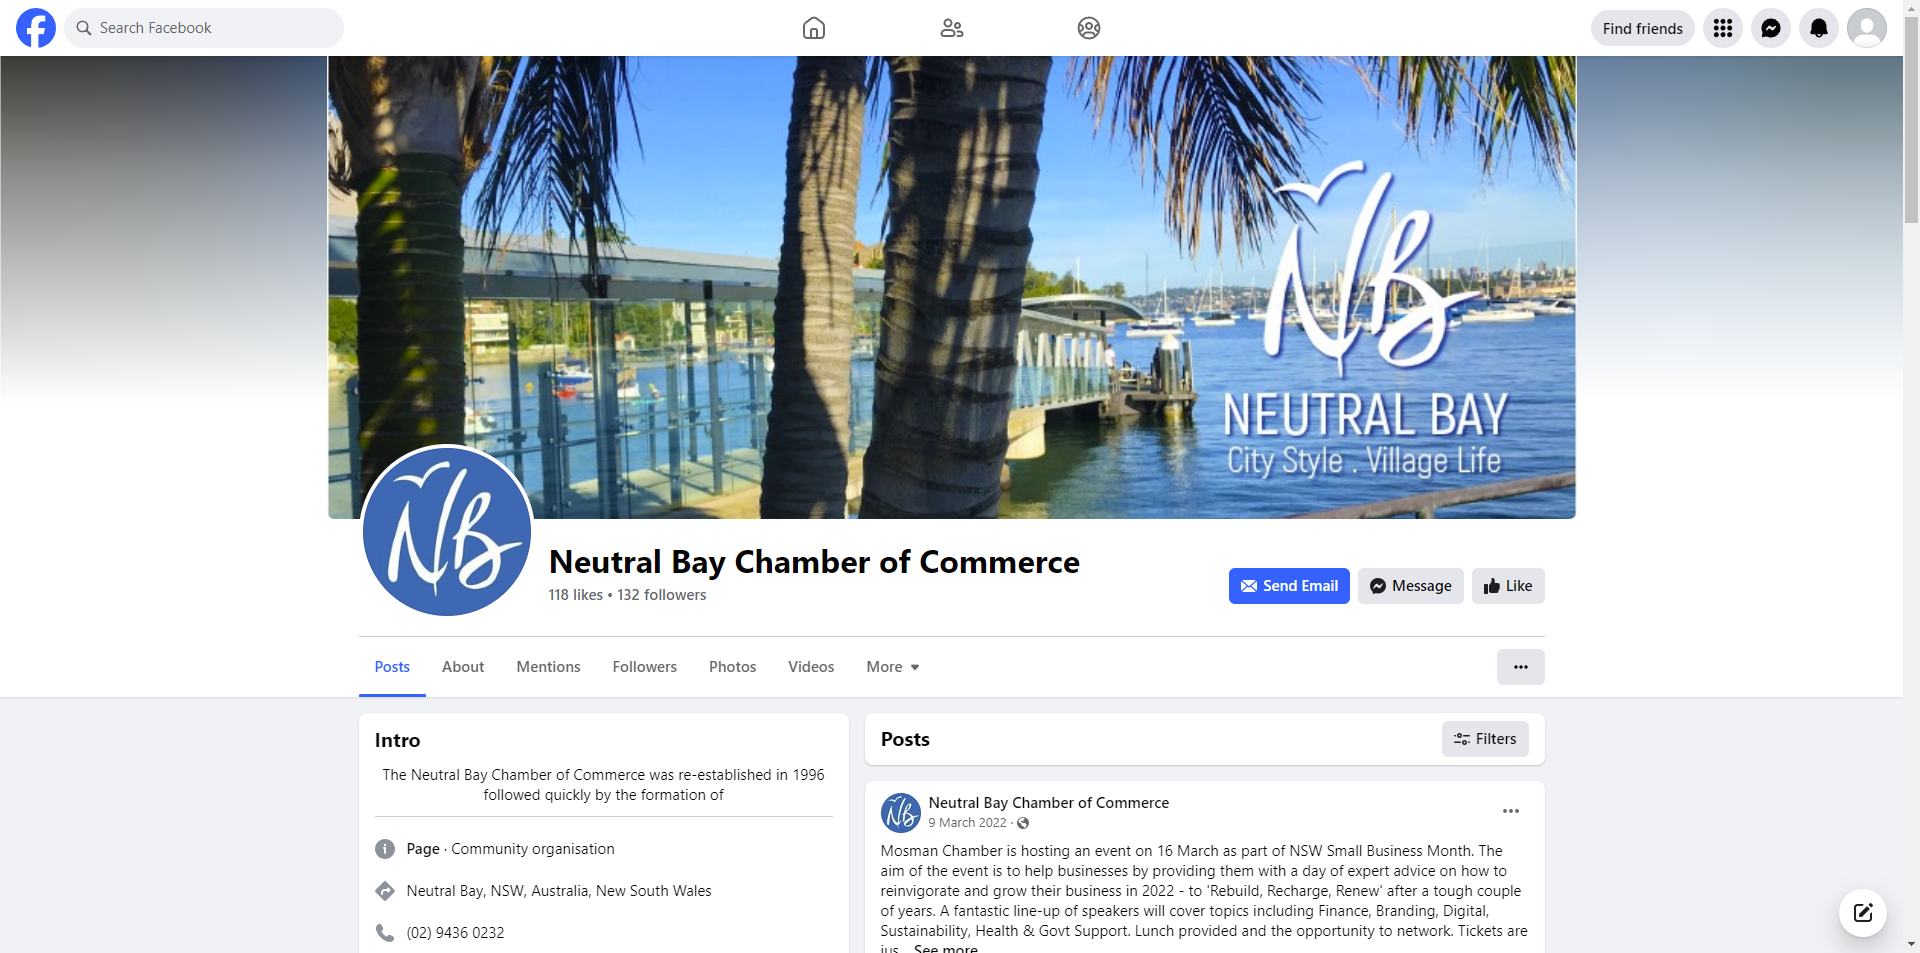 Neutral Bay Chamber of Commerce